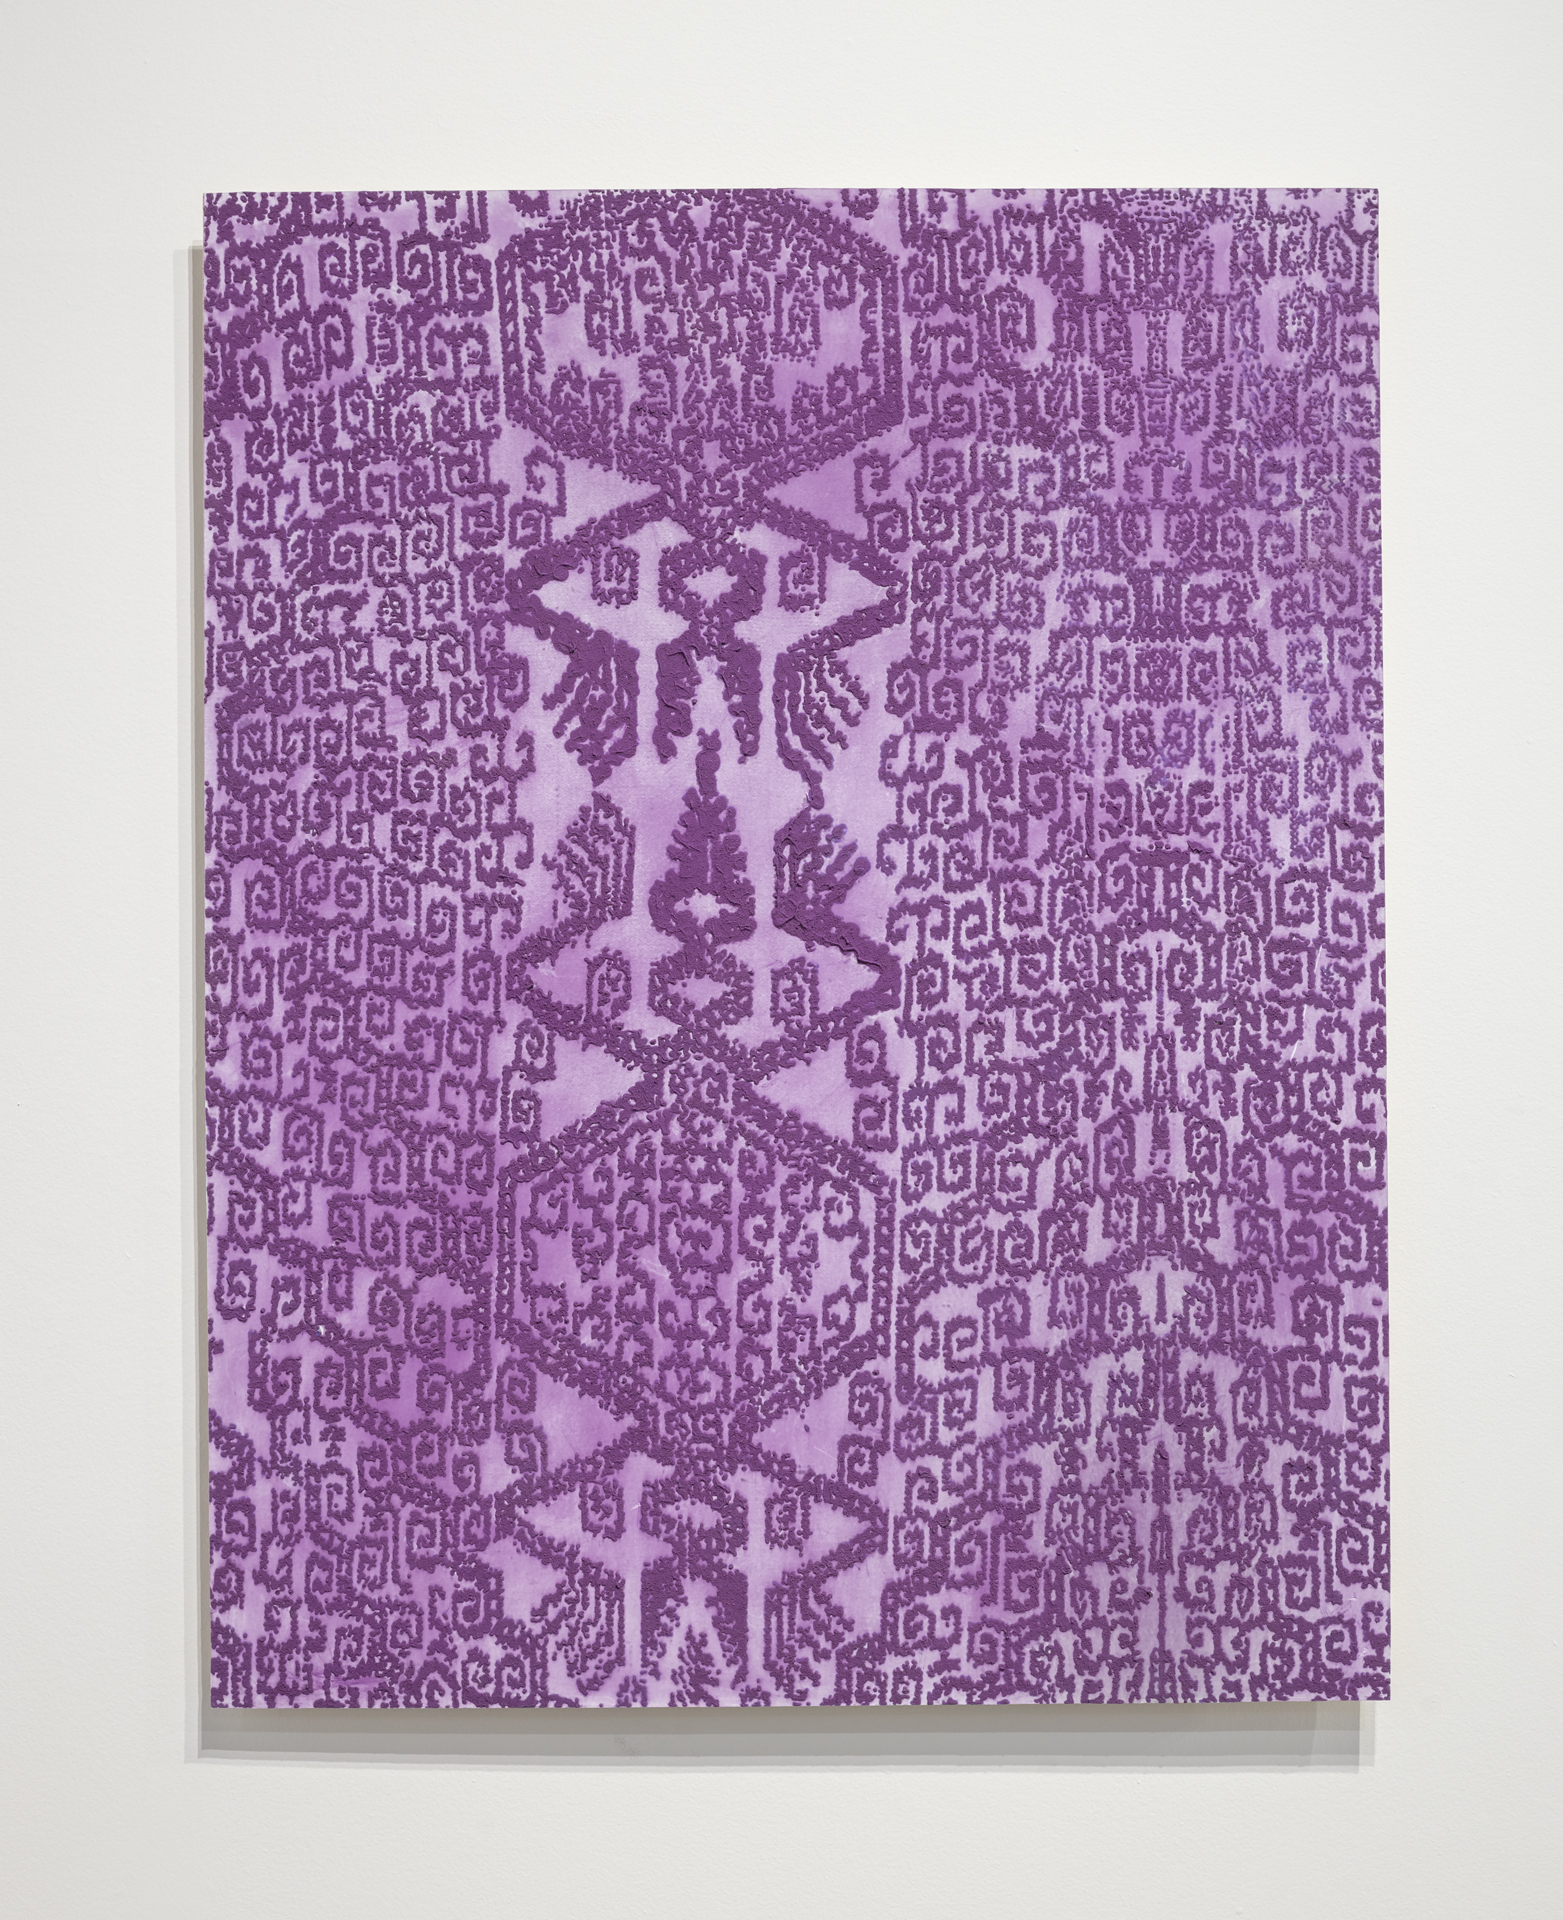 Artwork hanging on the wall made of Ube, digital photo print, acrylic paint, PVA glue, plywood, and manganese pigment